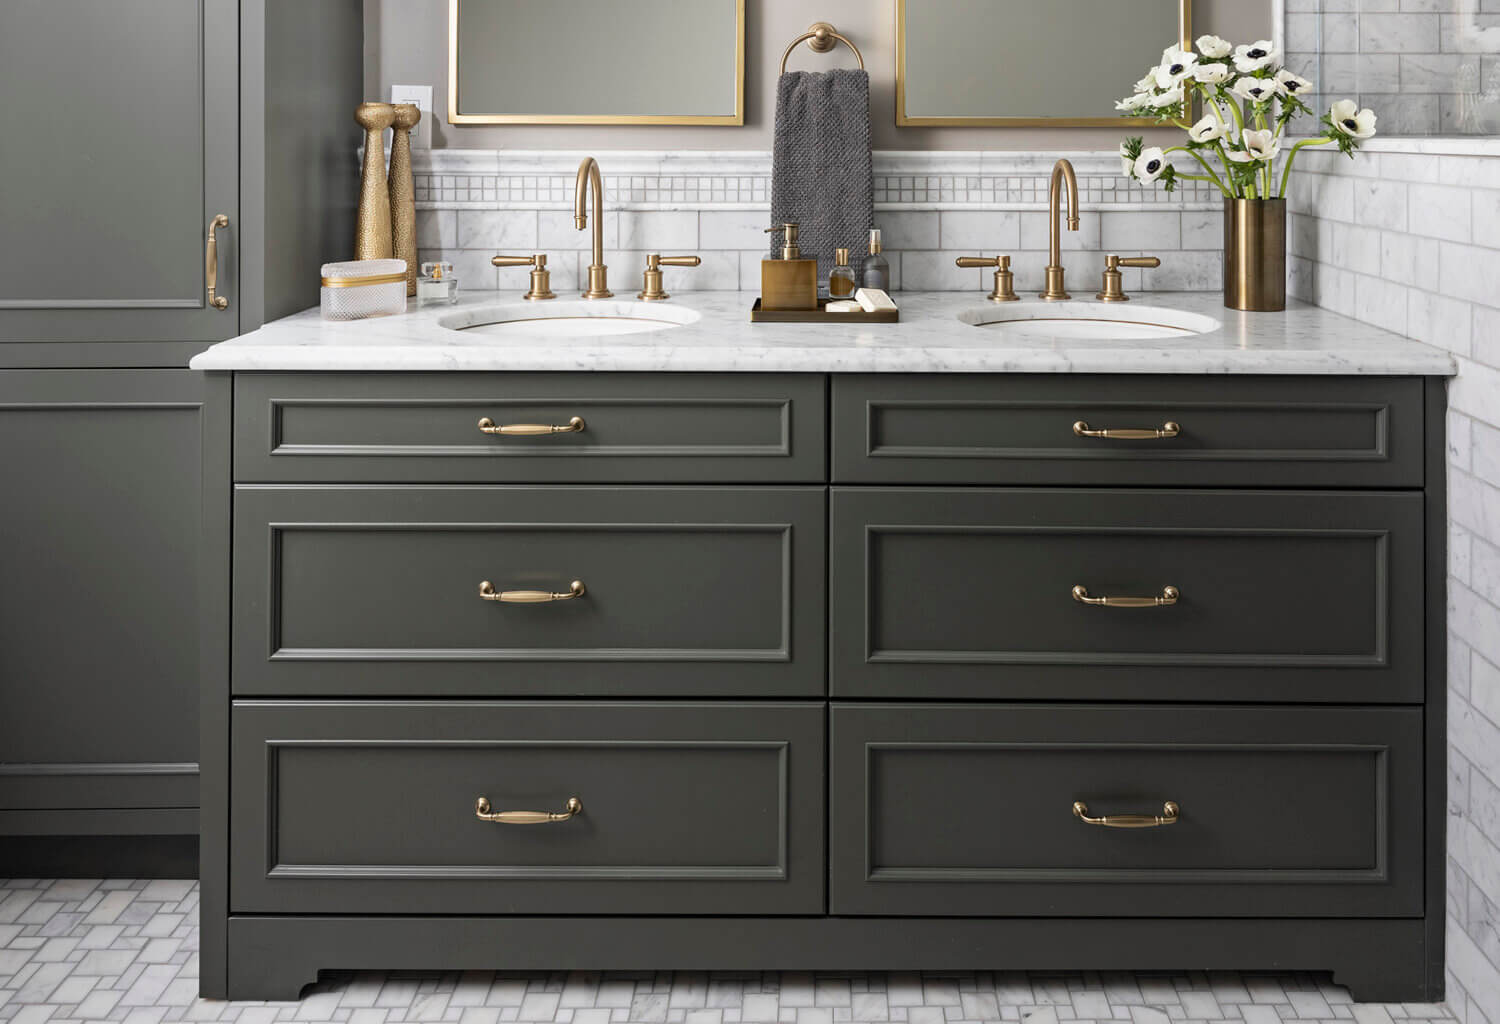 A dark green (almost black) painted bathroom vanity and tall linen cabinet with brass hardware and light gray tiles.